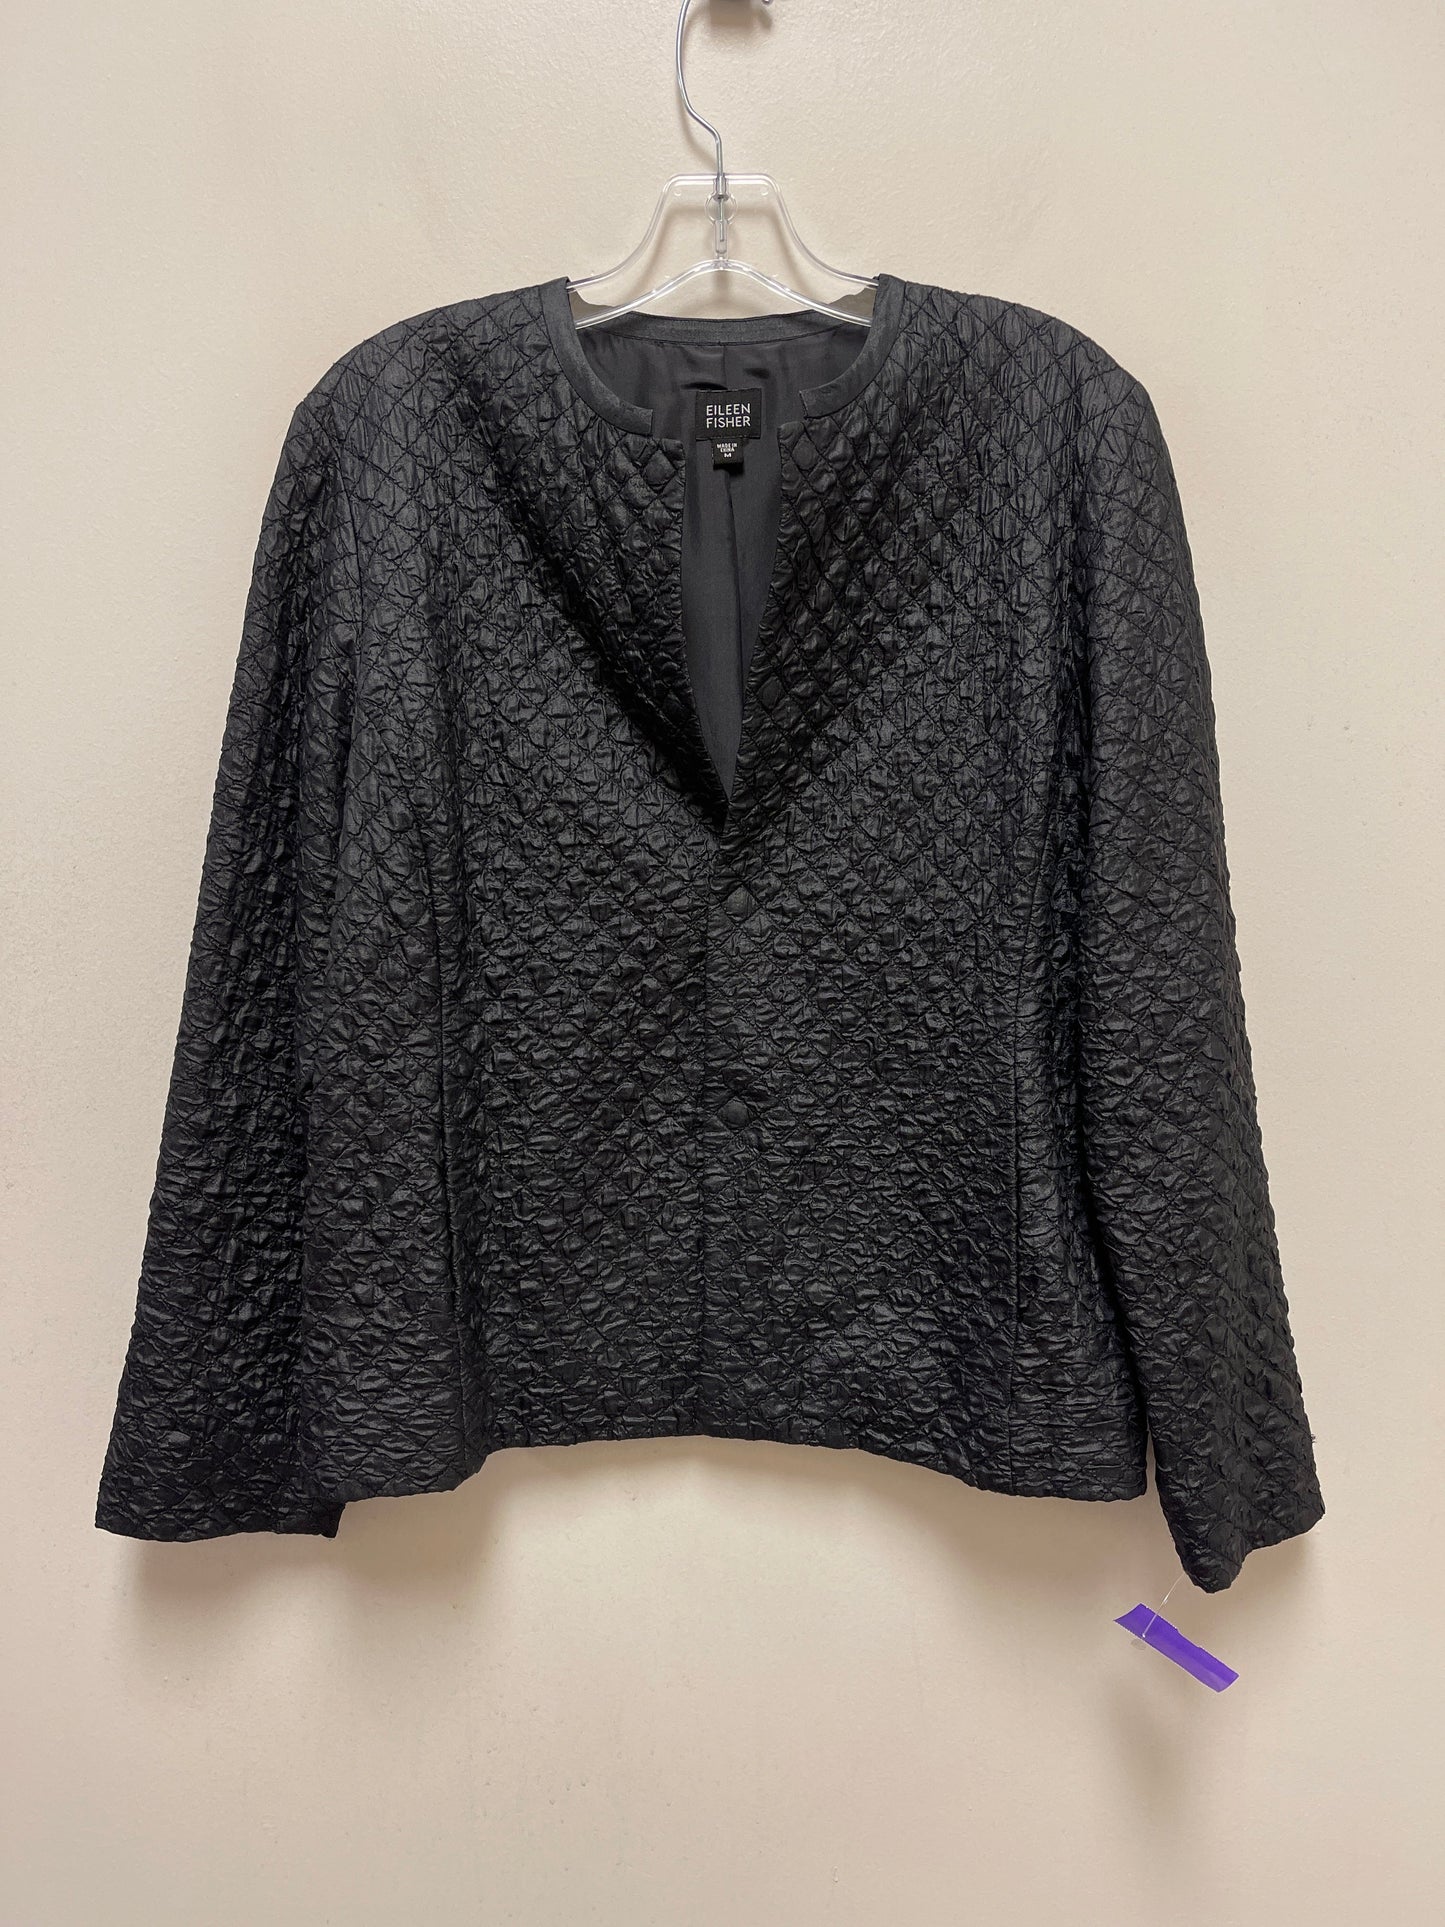 Black Jacket Other Eileen Fisher, Size M